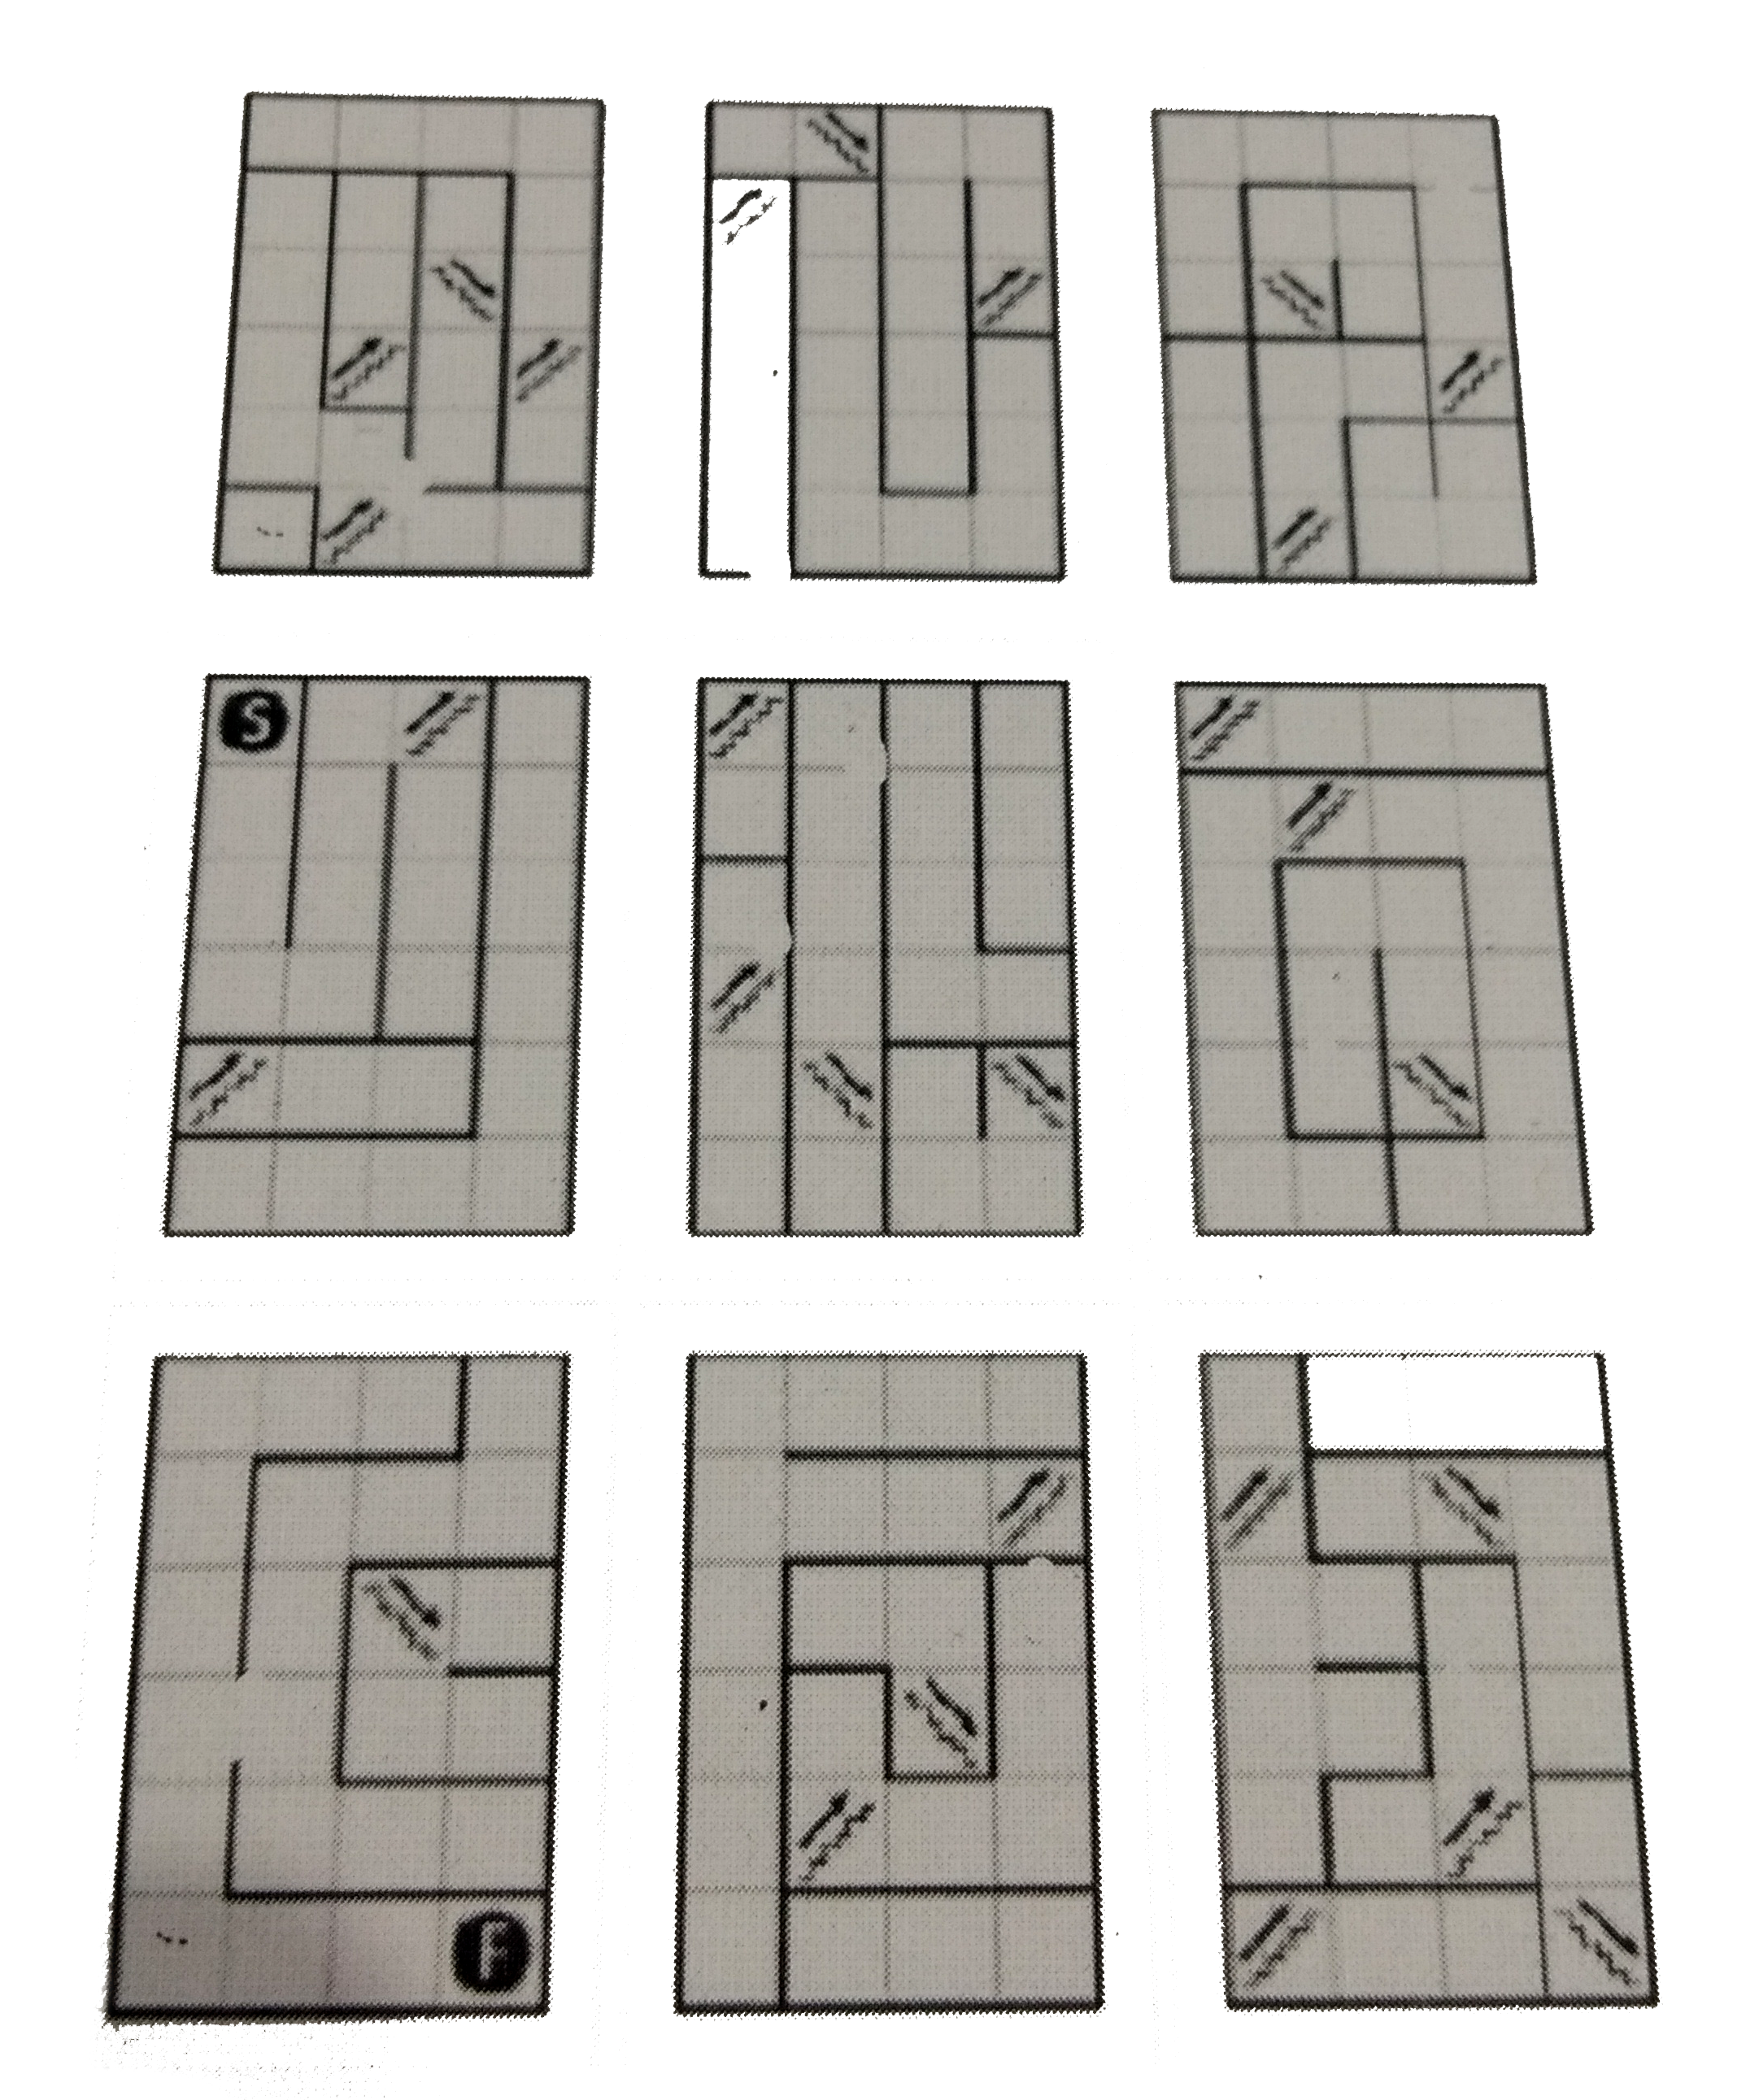 As he is wondering how to get inside, he sees Officer Jenny patrolling the area. He explains the situation to her. Officer Jenny says she has the floor plans for the HQ, but does not know how they fit together. She hands him the floor plans for the 9 floors (shown below). When arranged correctly, it will contain a path from the Start(S) on the bottom floor, to the Finish (F) on the top floor that goes through every up and down stairway. Everytime you hit an Up stairway, you must go to the square with the same coordinate in the floor directly above you. Similarly everytime you hit an Down stairway, you must go to the square with the same coordinates in the florr directly below you. You can’t cross heavy black walls or retrace any part of your path. The cards are given the values 1-9 horizon- tally. In the final arrangement,  let the card corresponding to i^(th) floor be called ci. Then, the value of [(c1*c9)+(c2*c8)+(c3*c7)+(c4*c6)+c5] is?